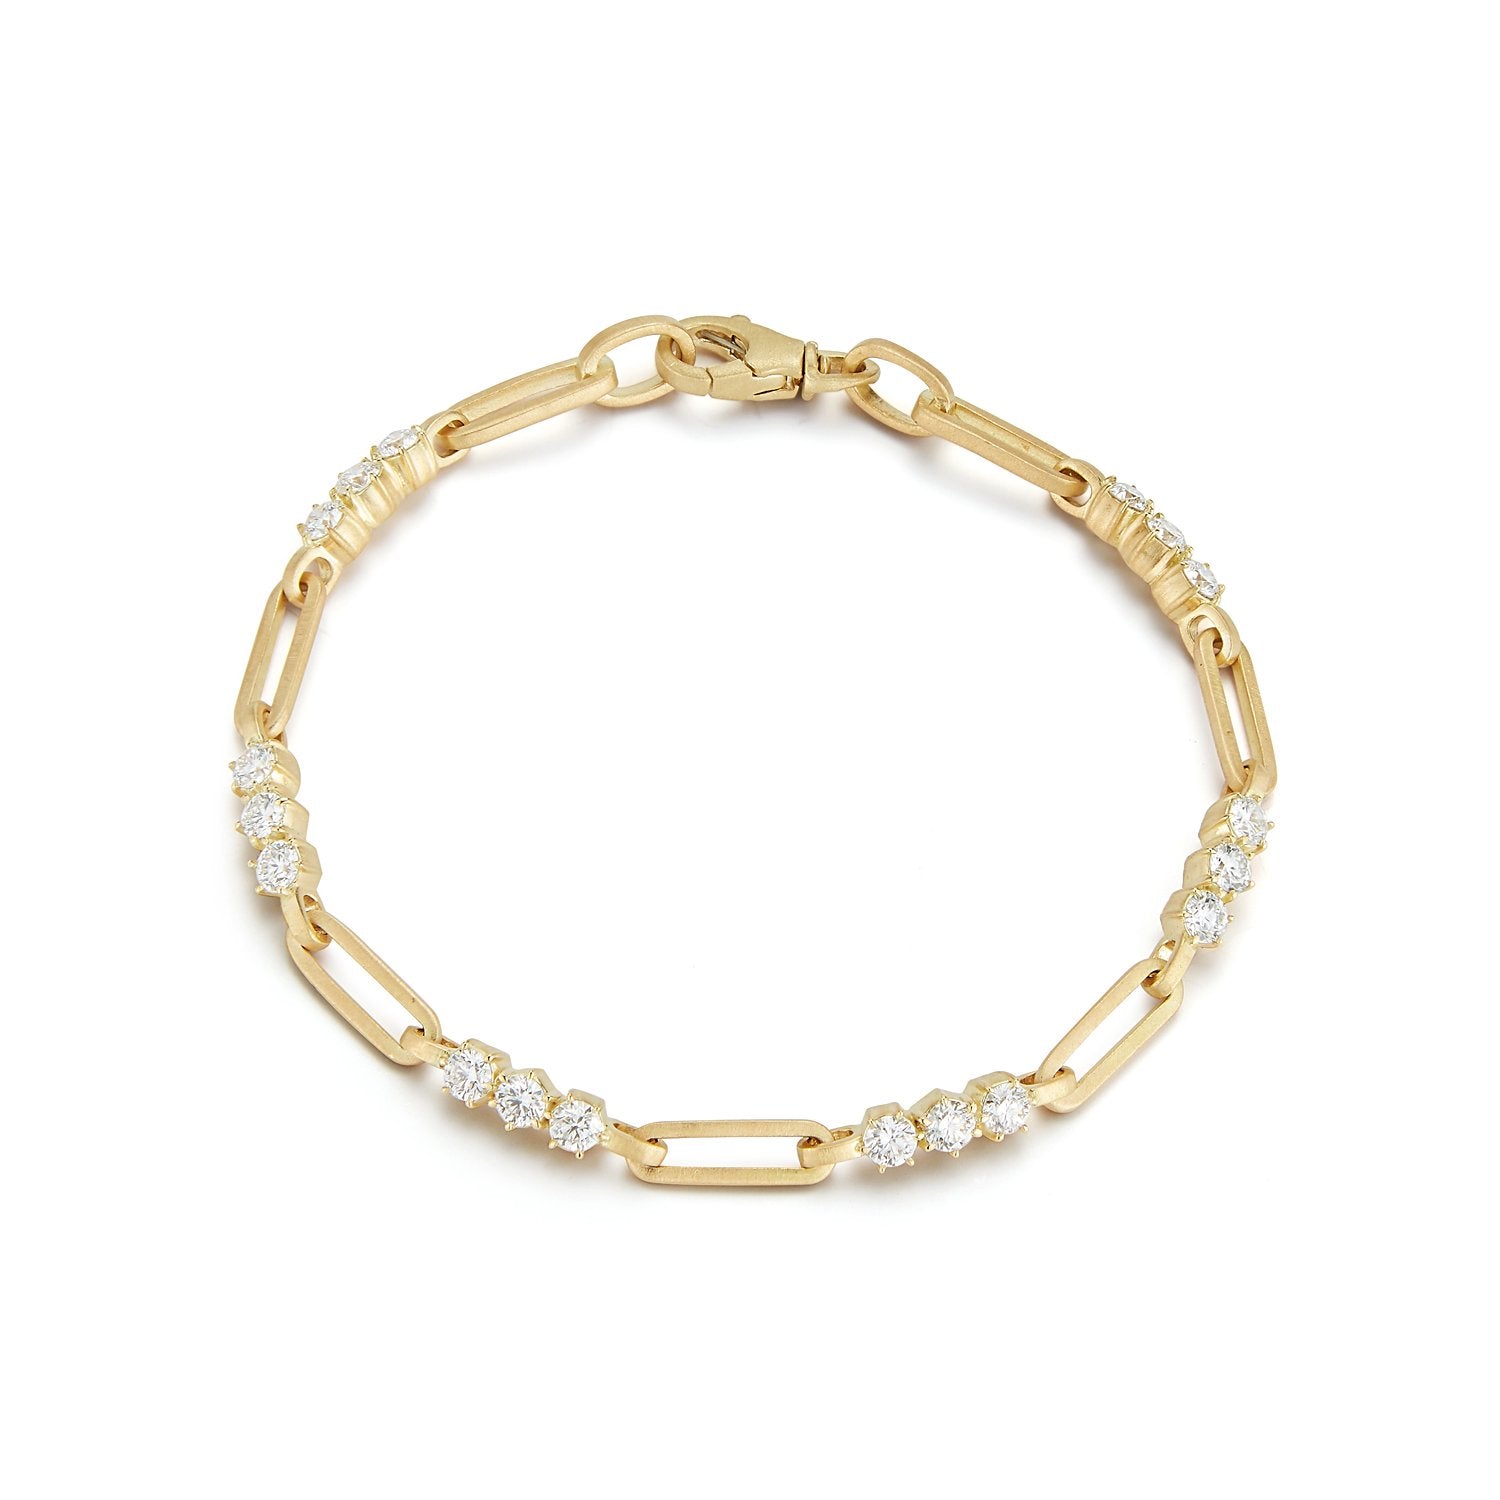 Pia Gold Chain Link Bracelet with Diamonds